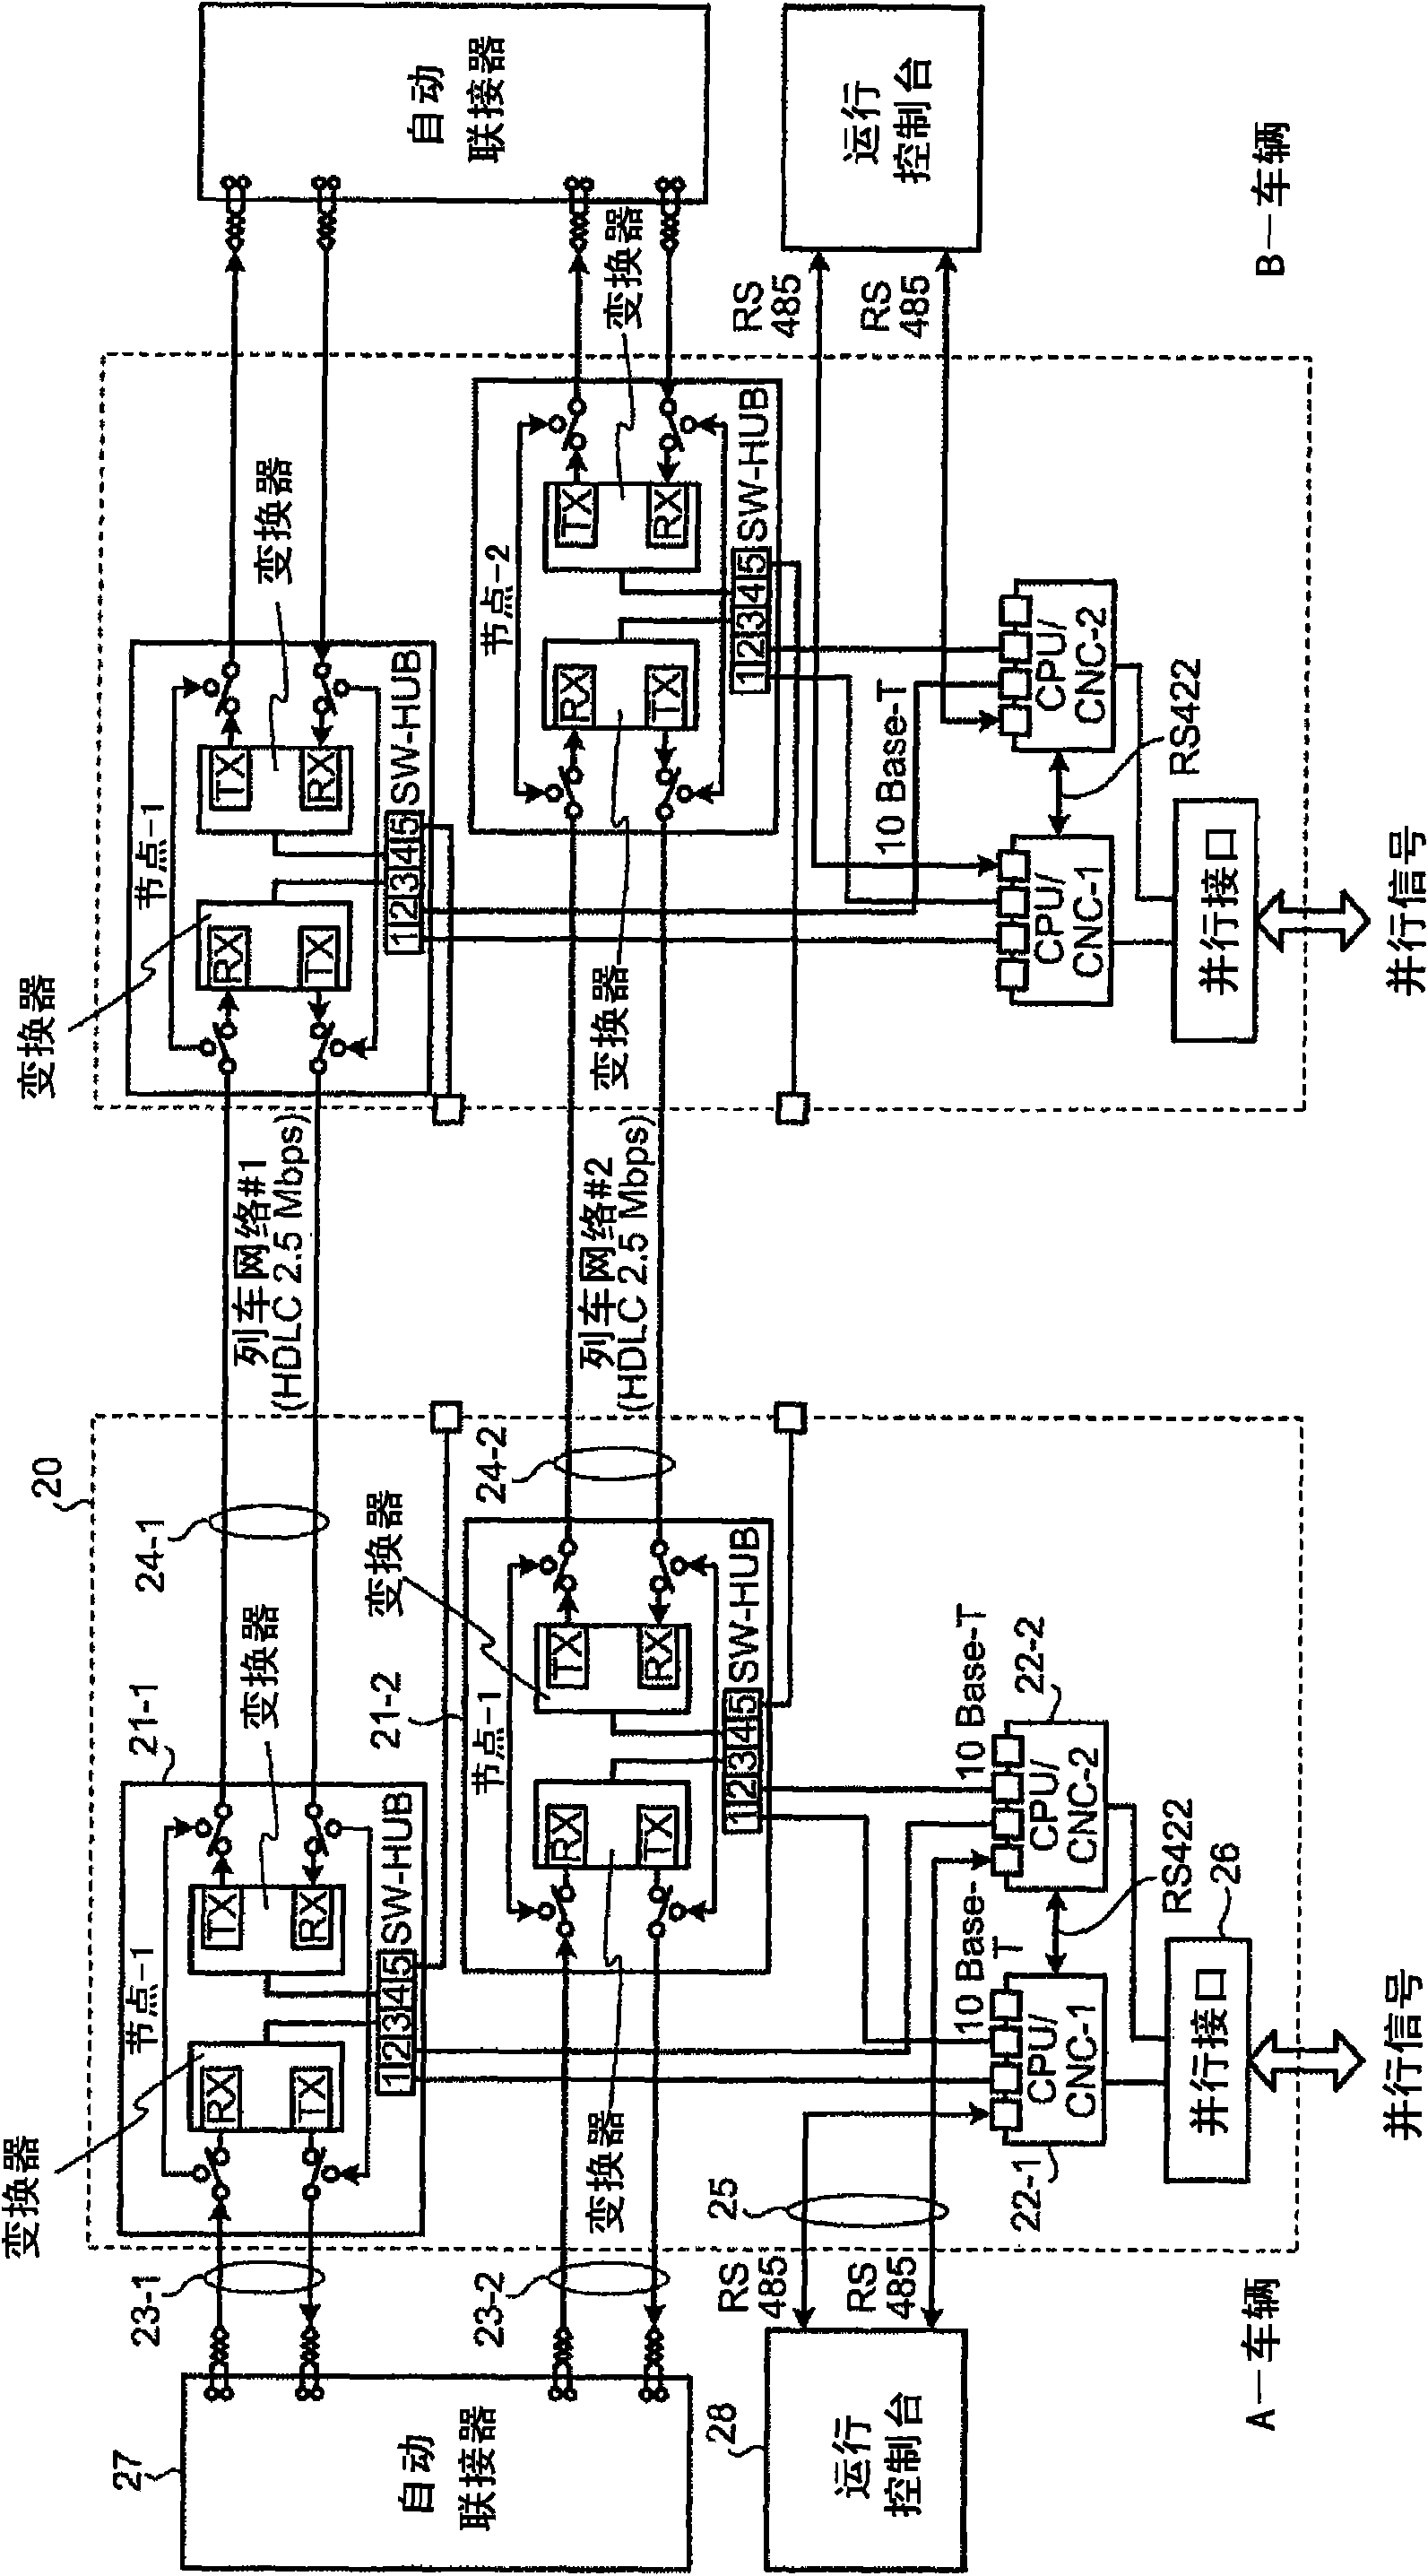 Communication apparatus for rolling stock